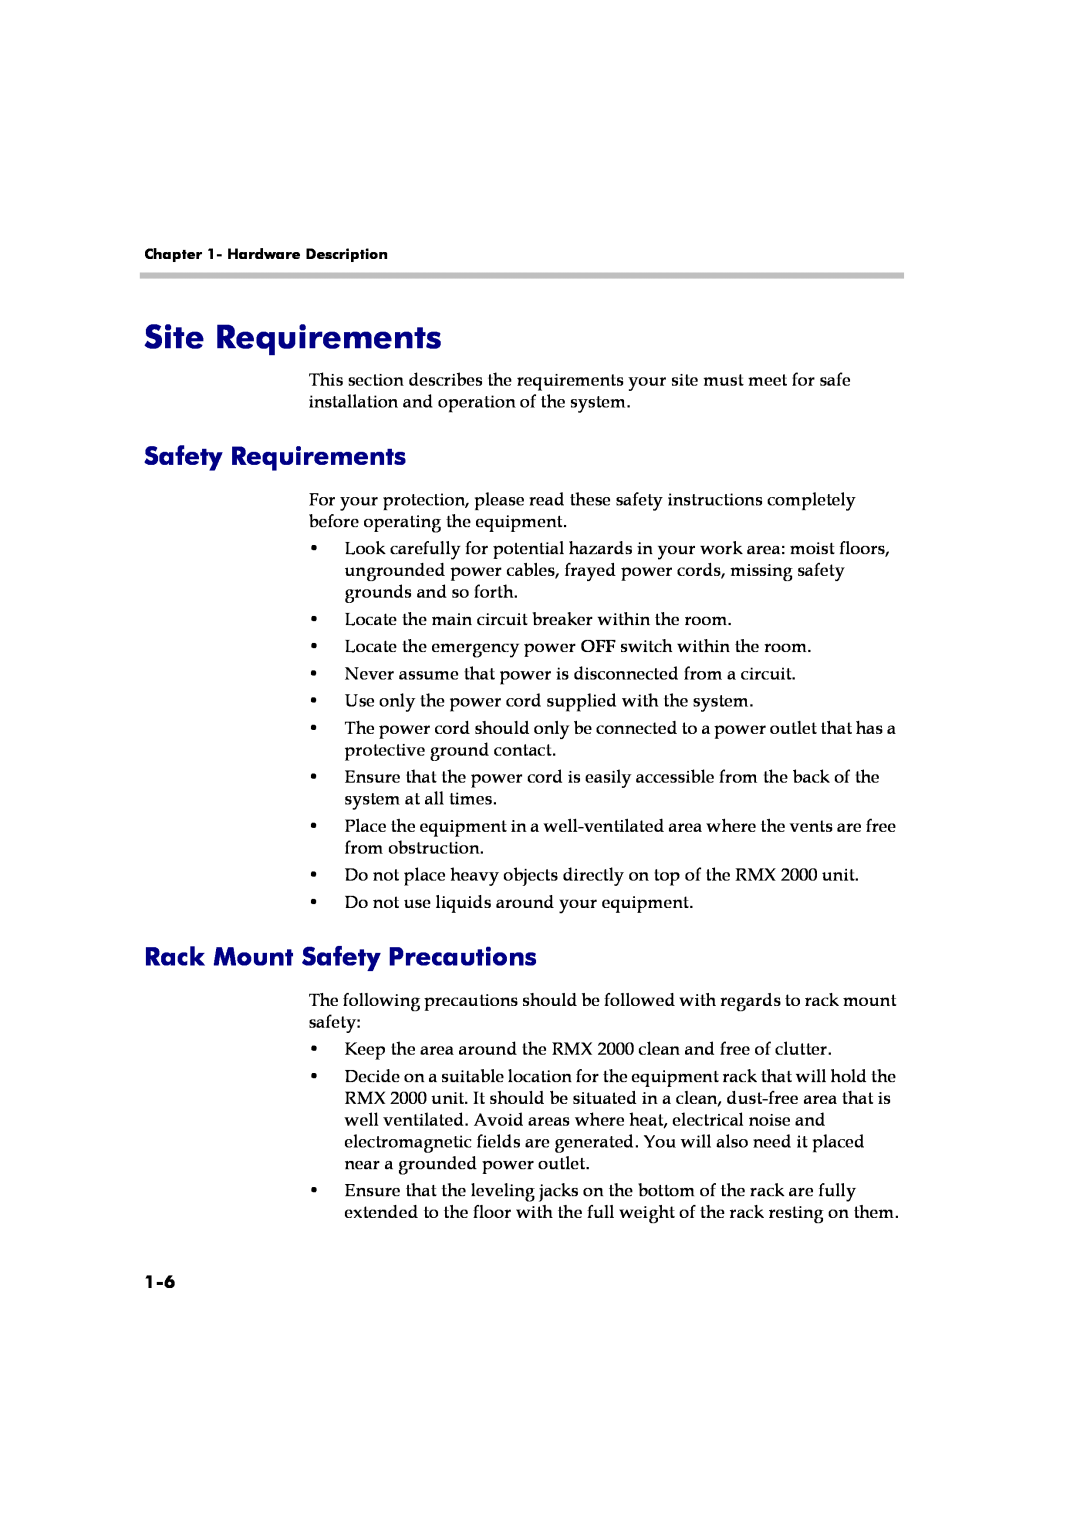 Polycom DOC2558B manual Site Requirements, Safety Requirements, Rack Mount Safety Precautions 